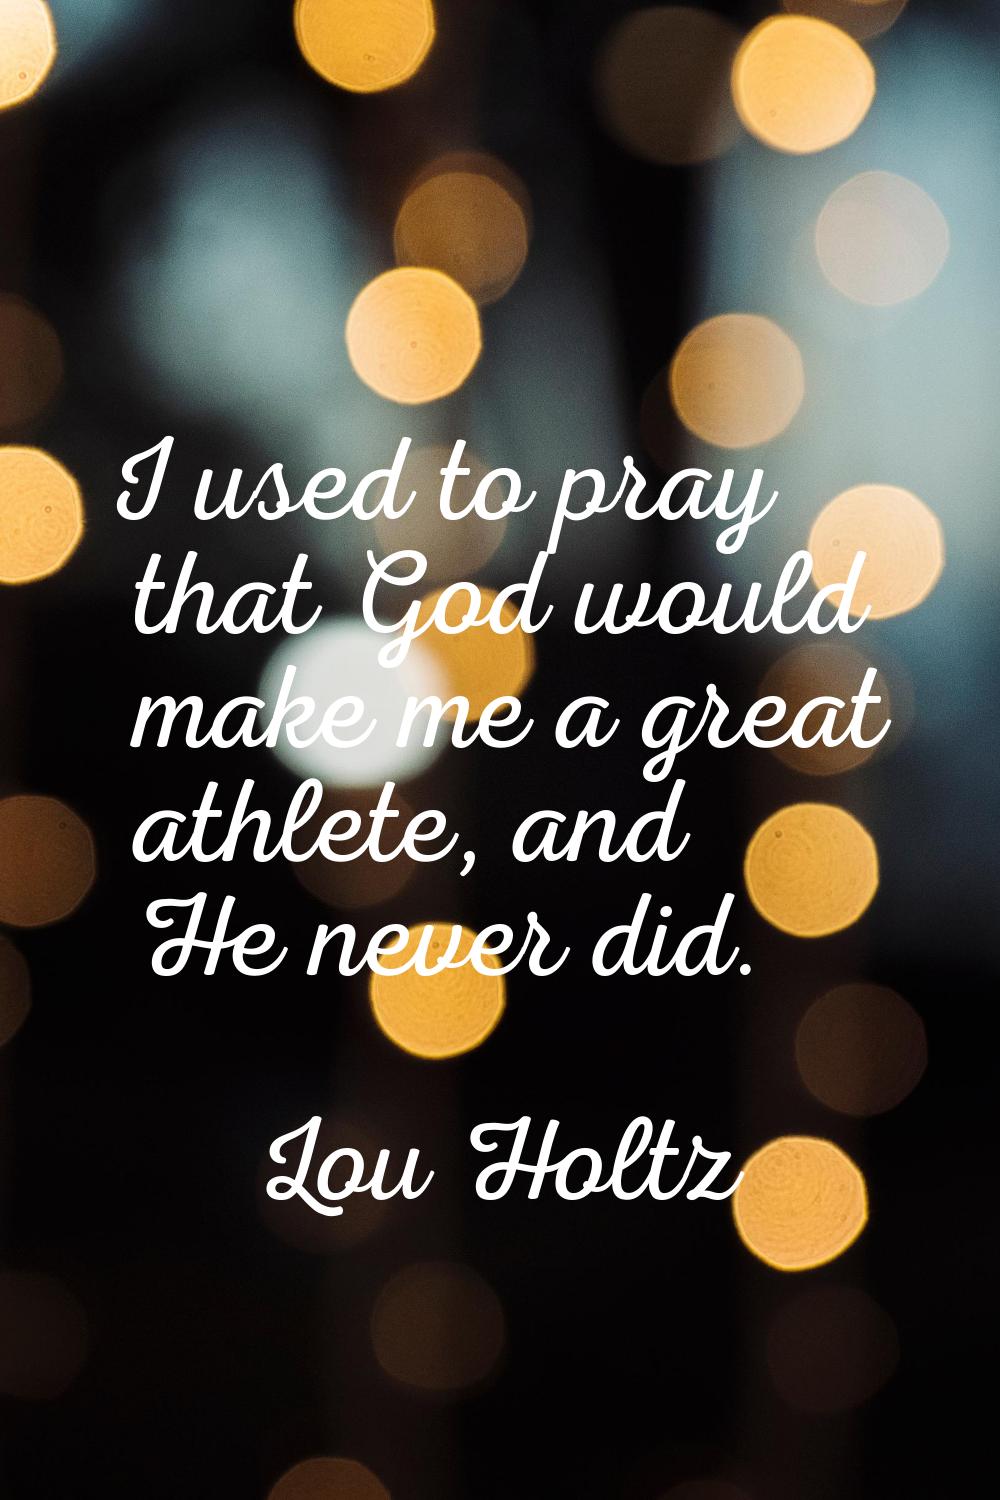 I used to pray that God would make me a great athlete, and He never did.